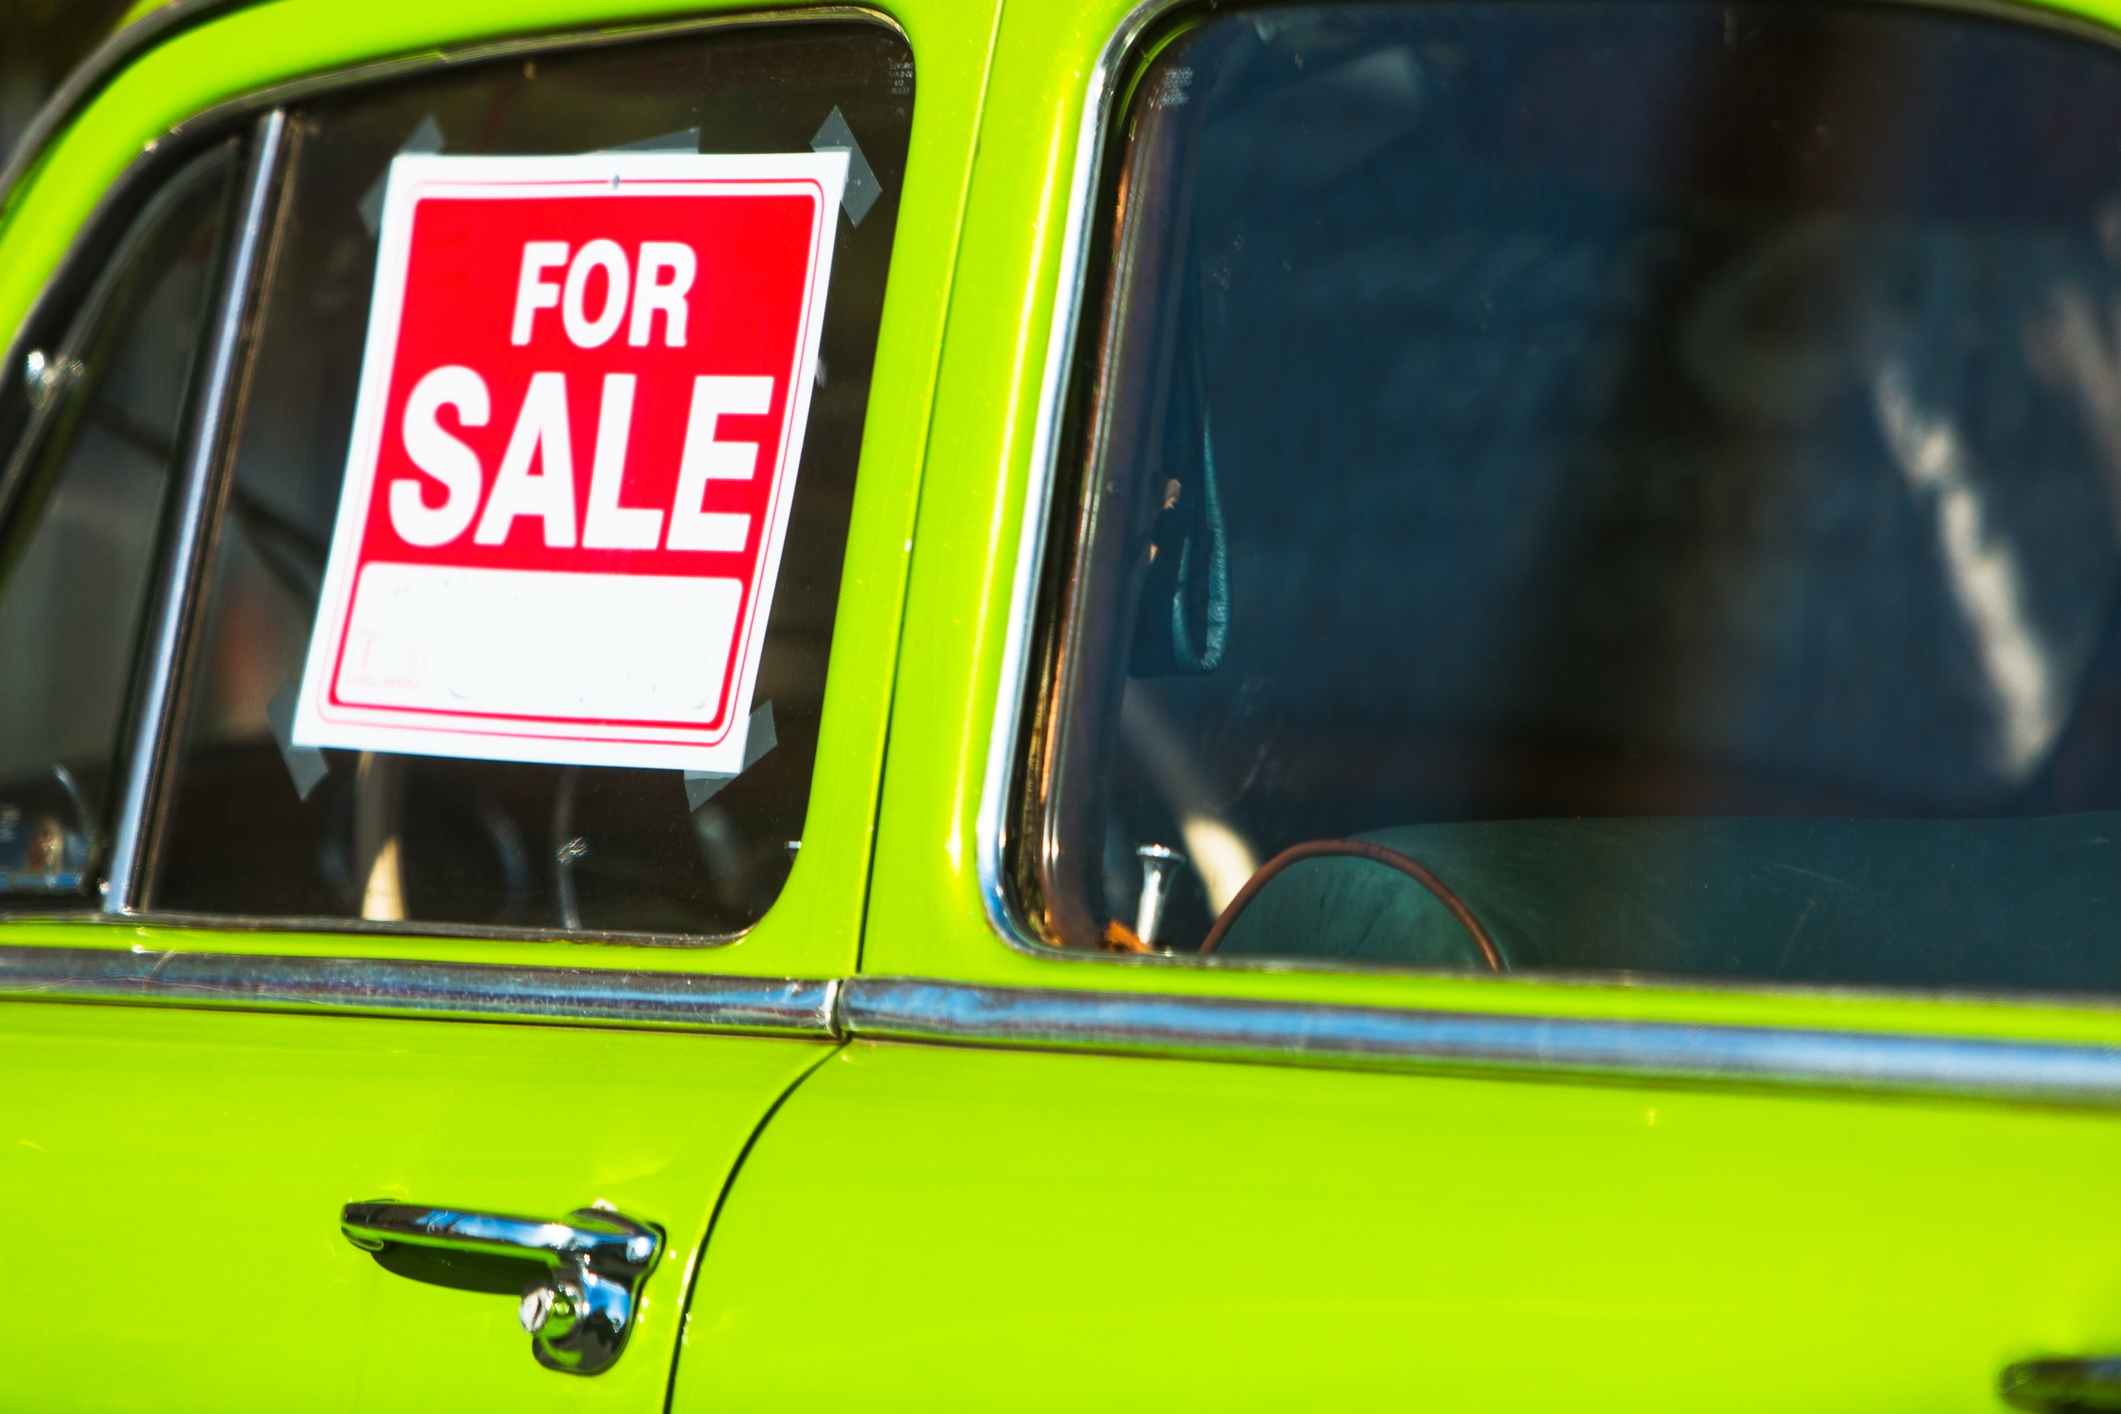 An urgent warning has been put out to used car owners who plan to sell their vehicles